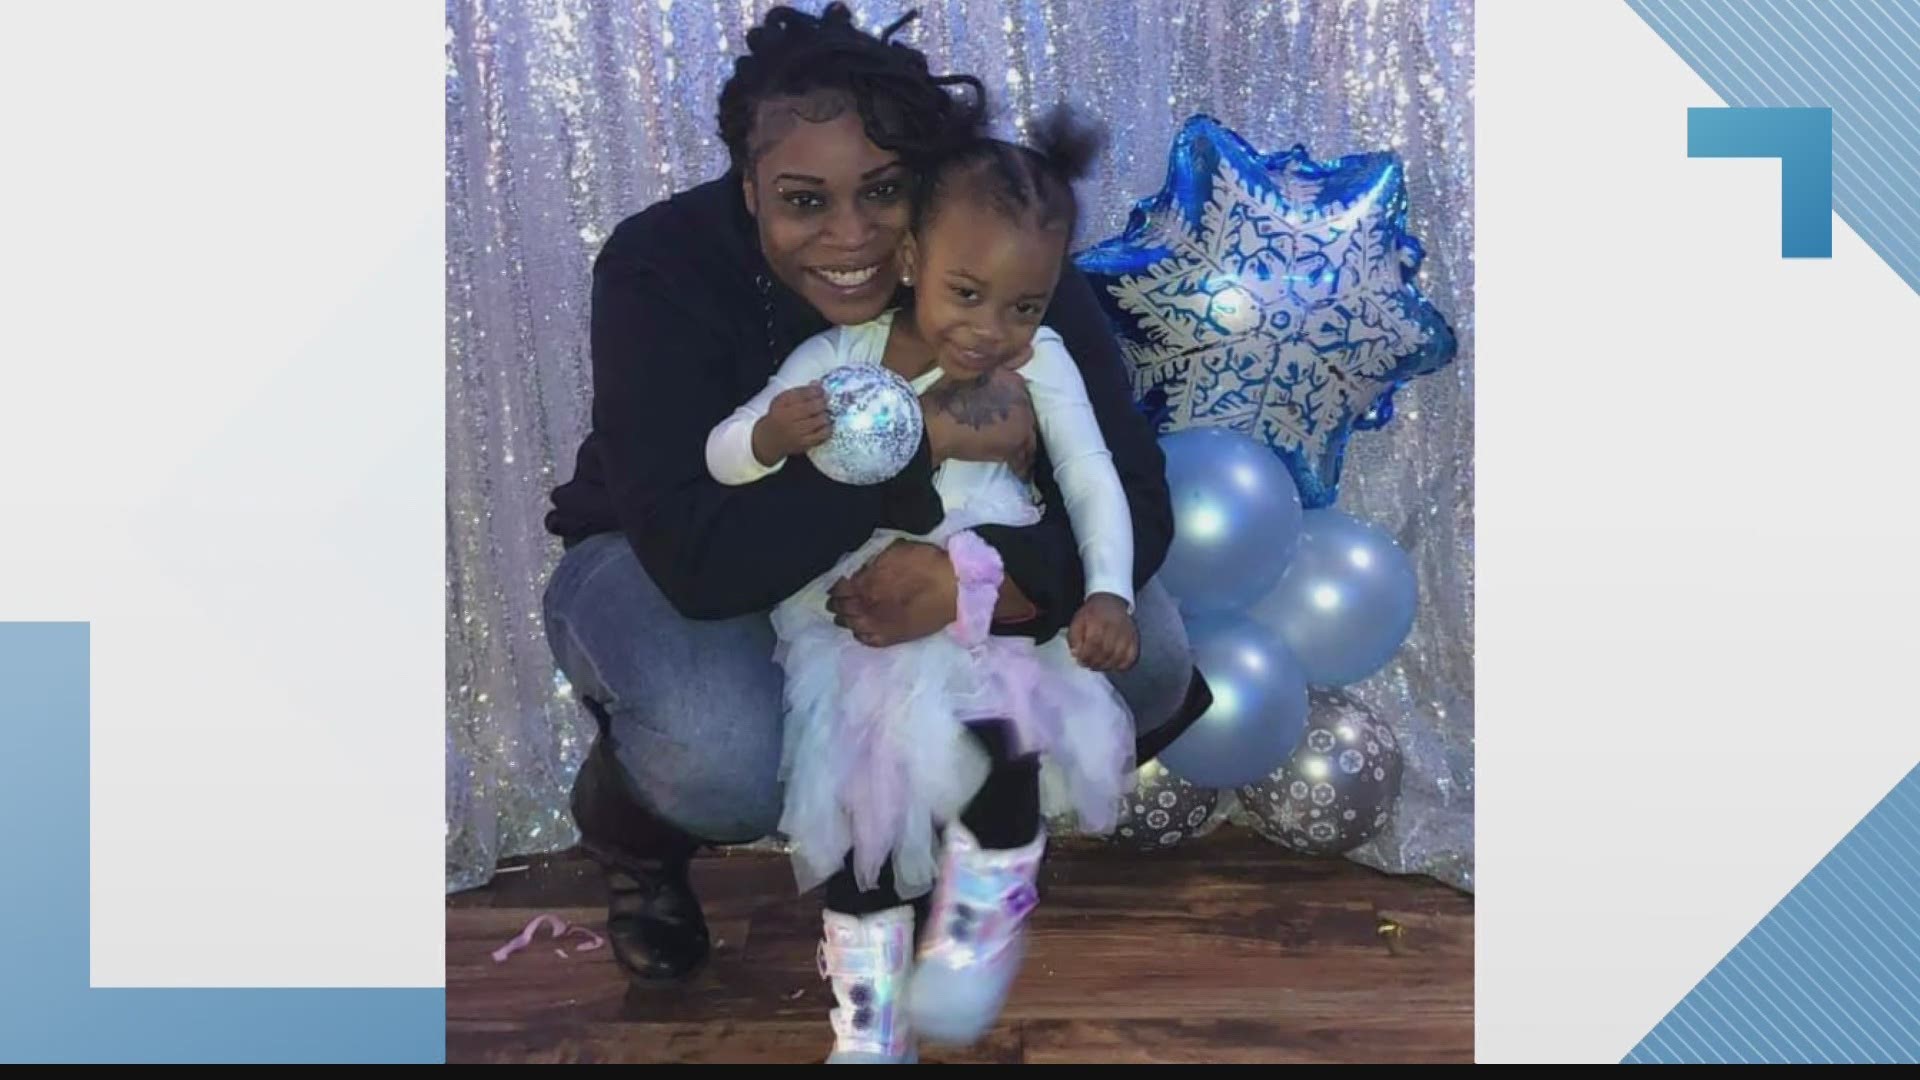 Domonique Hicks, 29, was pronounced dead at the hospital. Her 2-year-old daughter remains at the hospital in critical condition